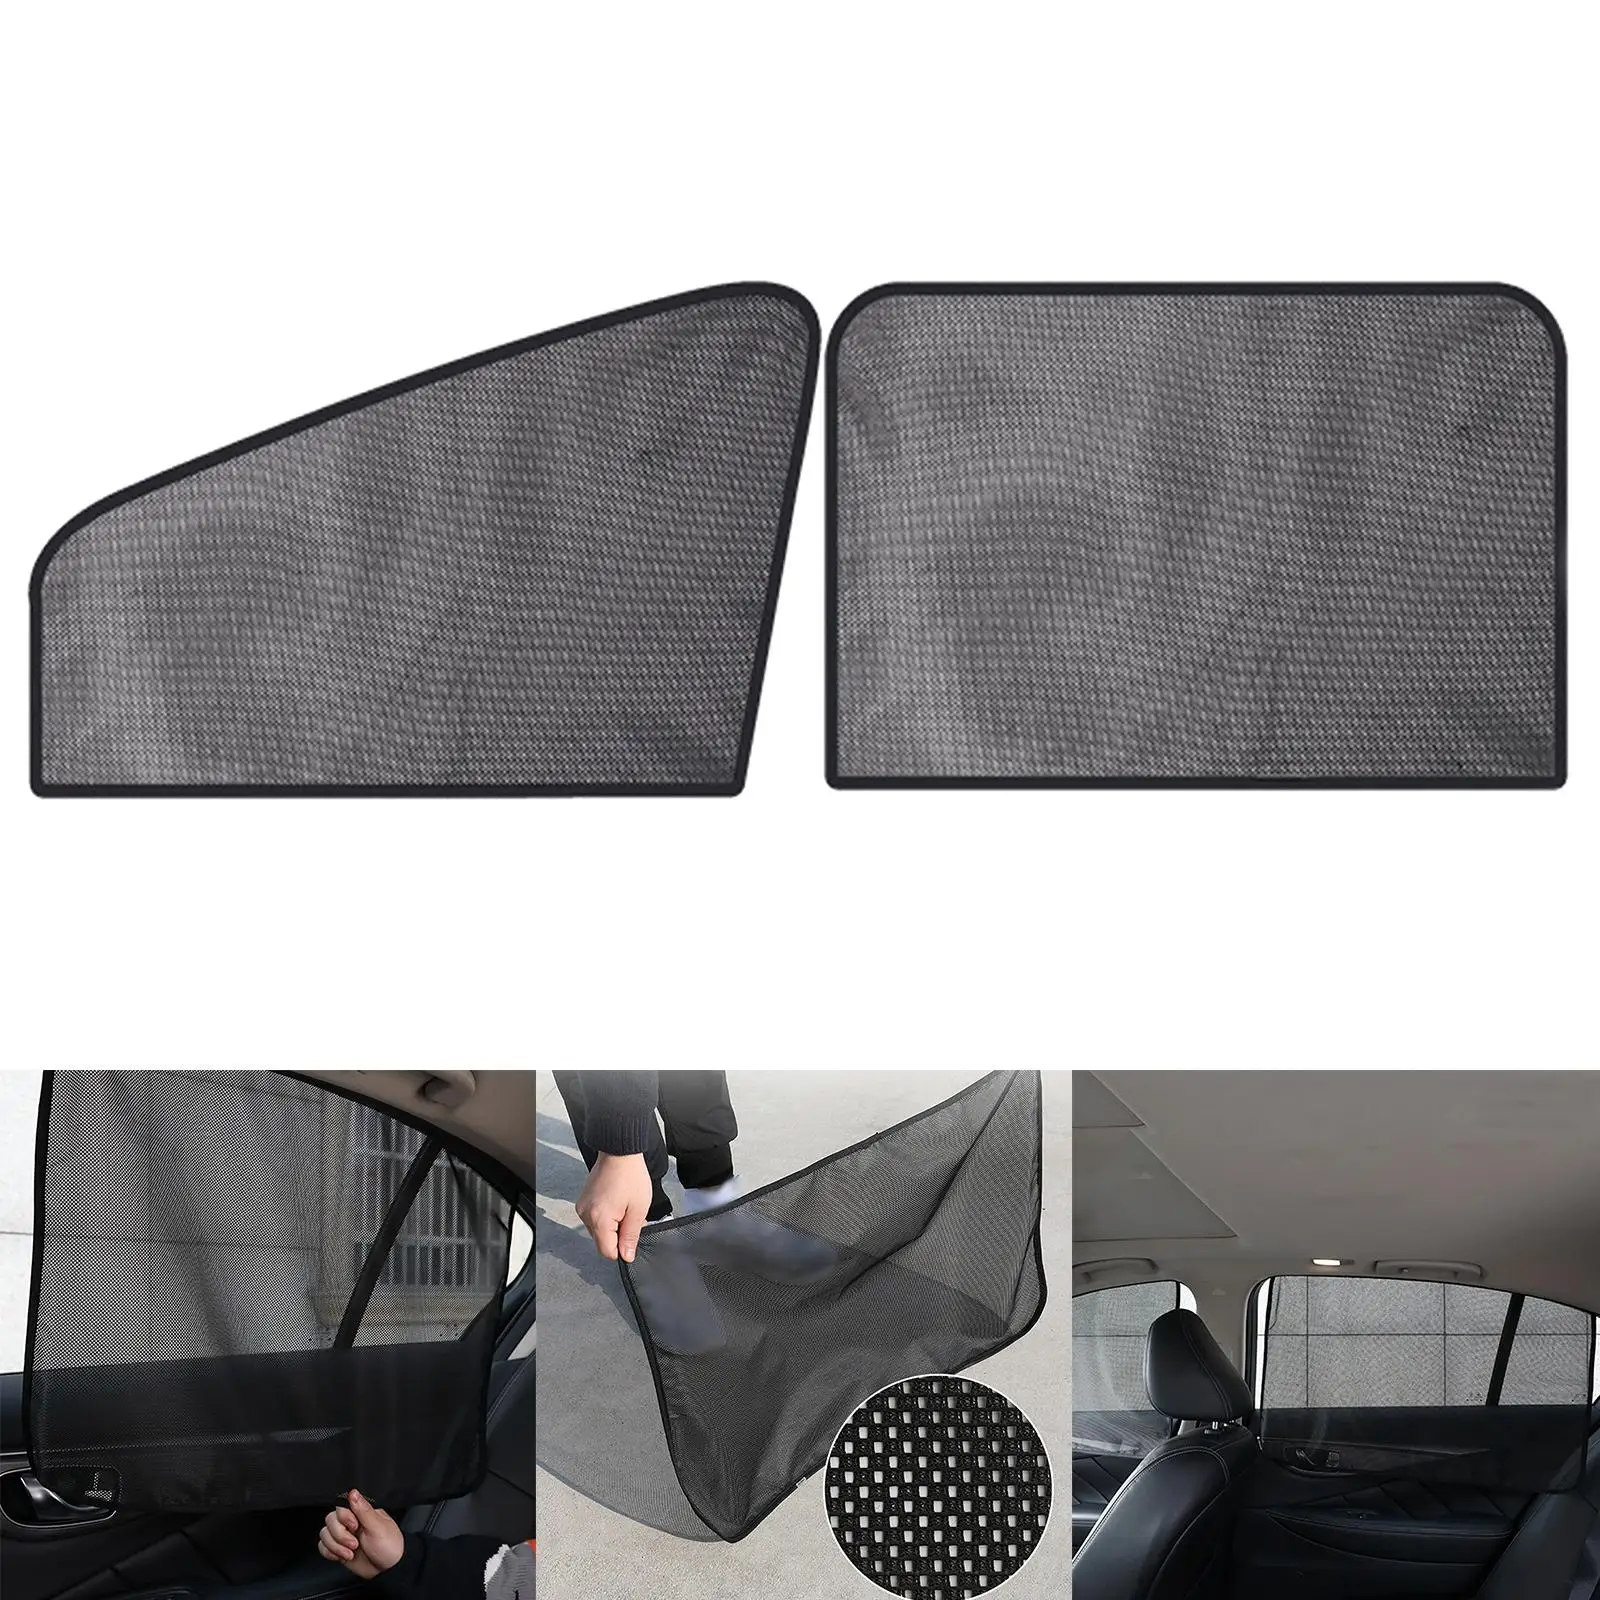  Window   Camping for Baby and Kids Car Window Shade Fits for Vehicle Accessories Car Part SUV